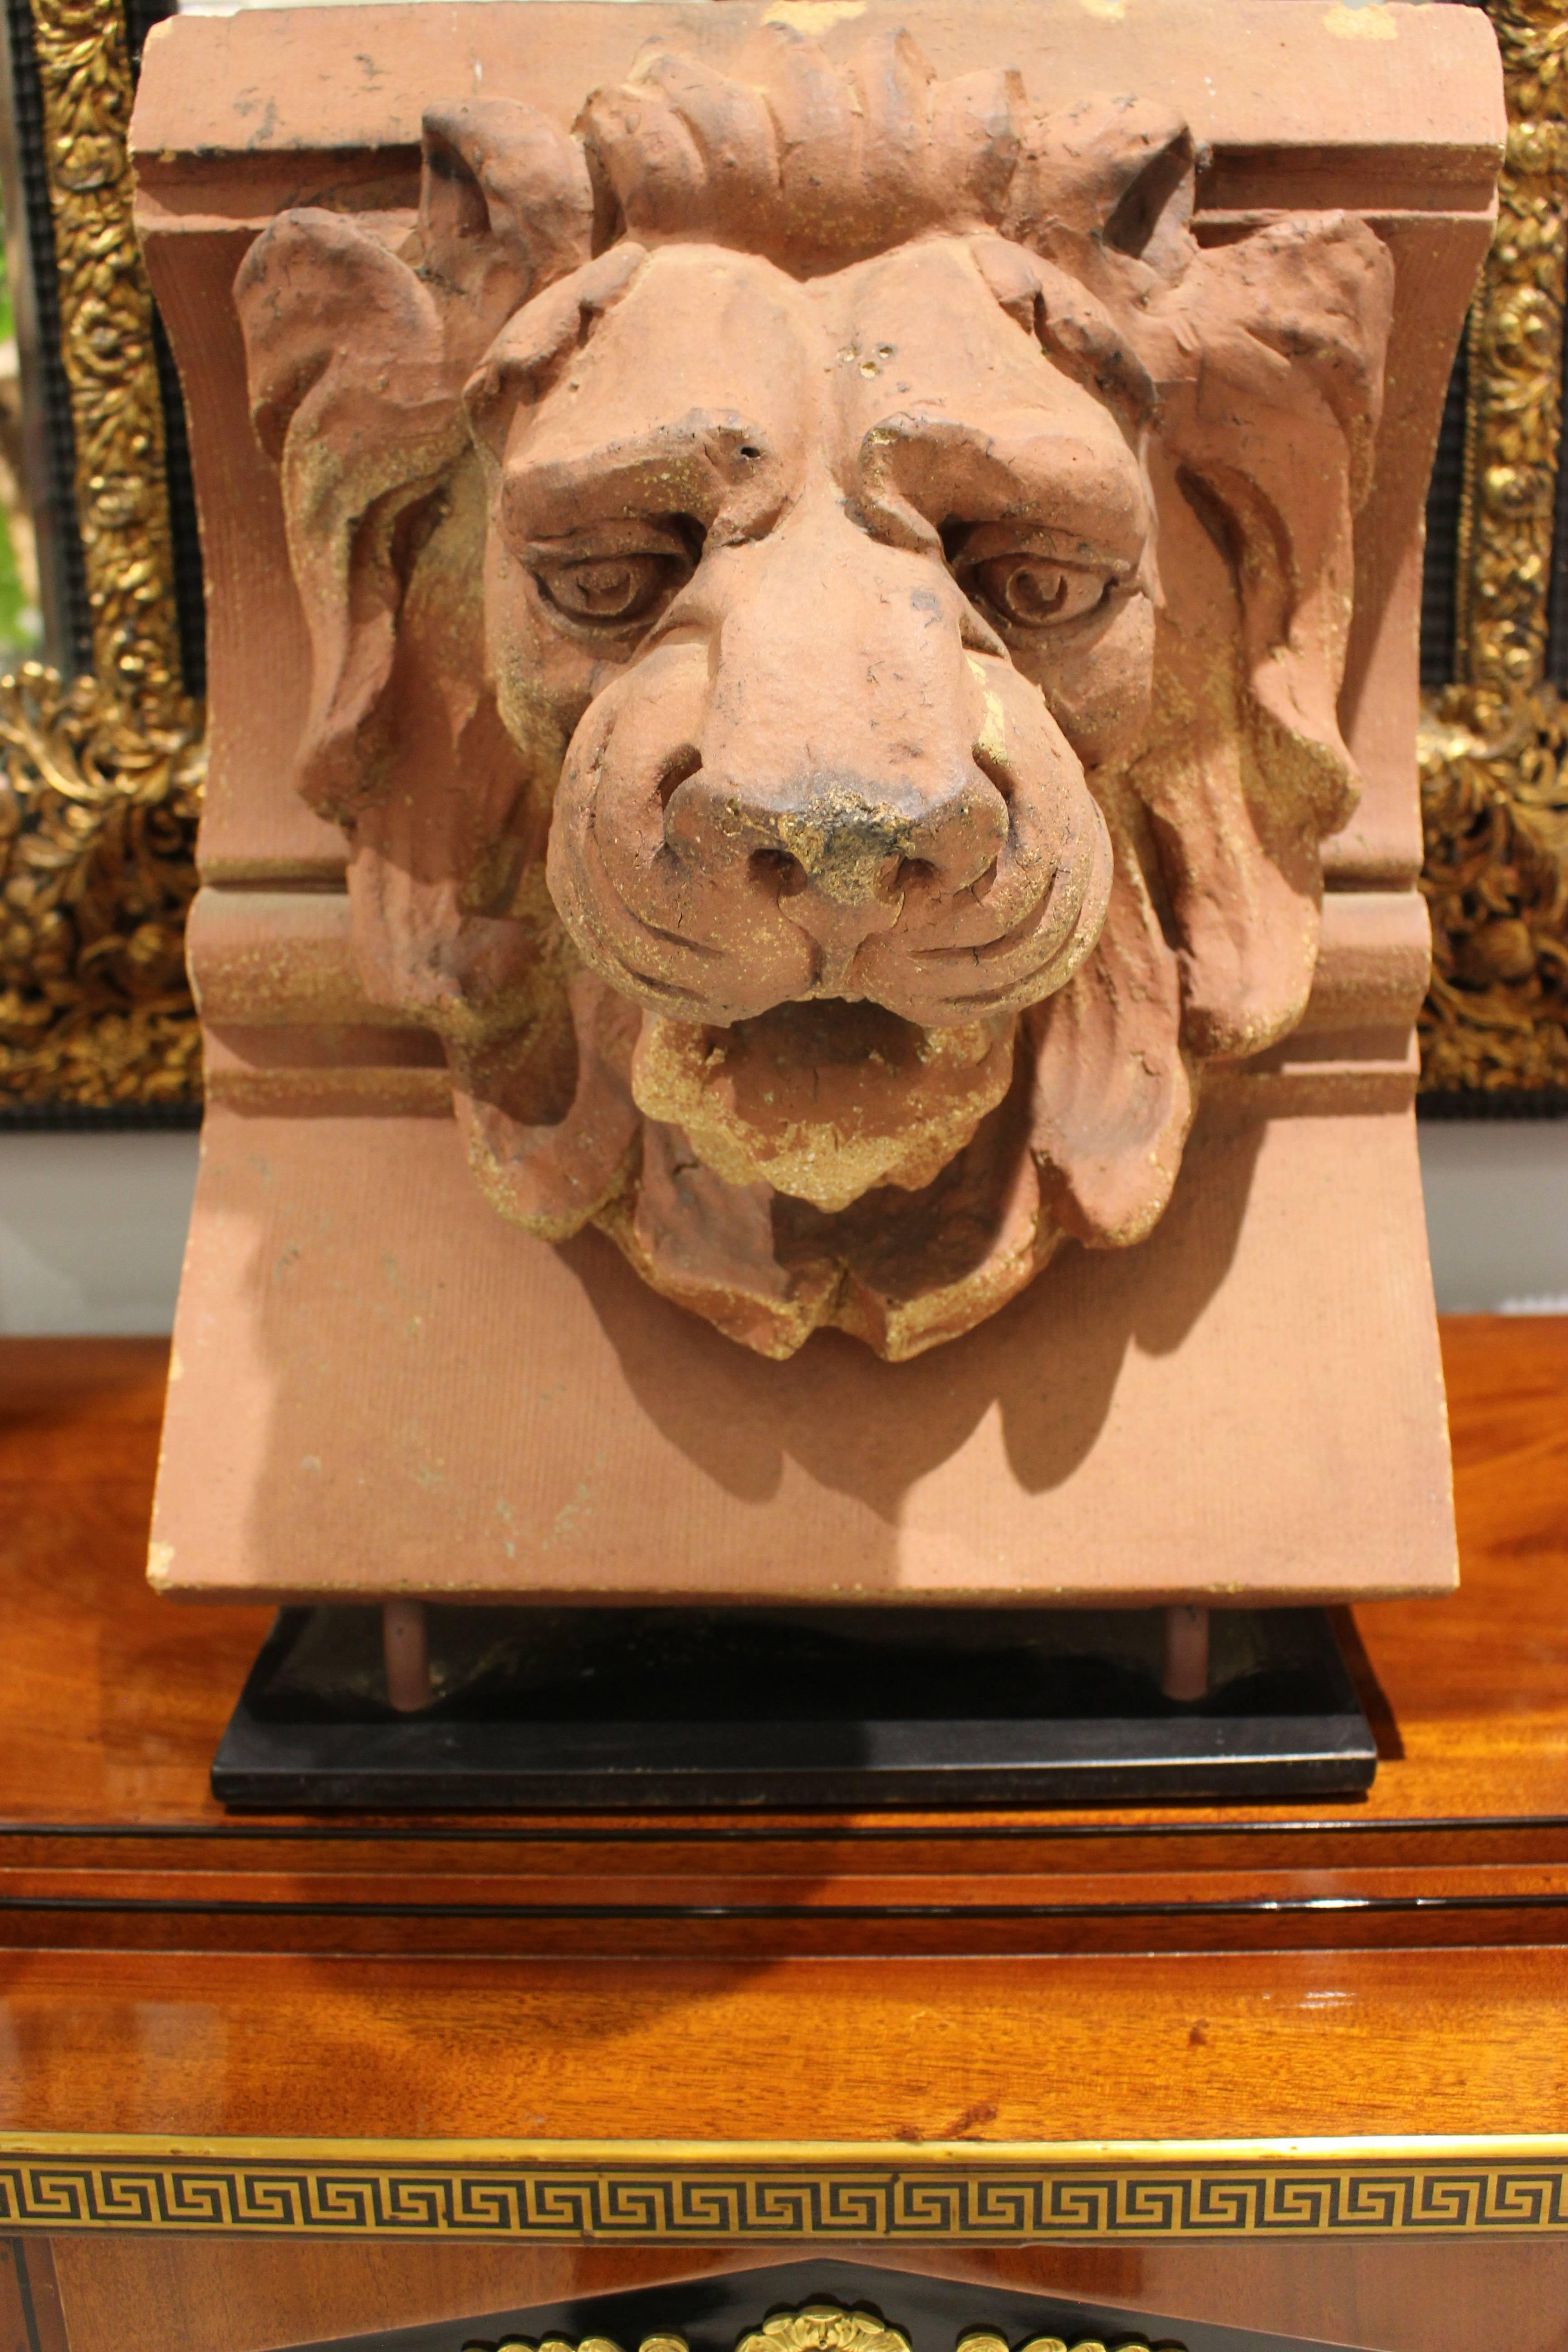 A pair of late 19th century salvaged American terracotta architectural elements in the form of roaring lions faces molded between a groove and a torus on a concave streaked surface. Probably a modillion or cornice element once, each lion is